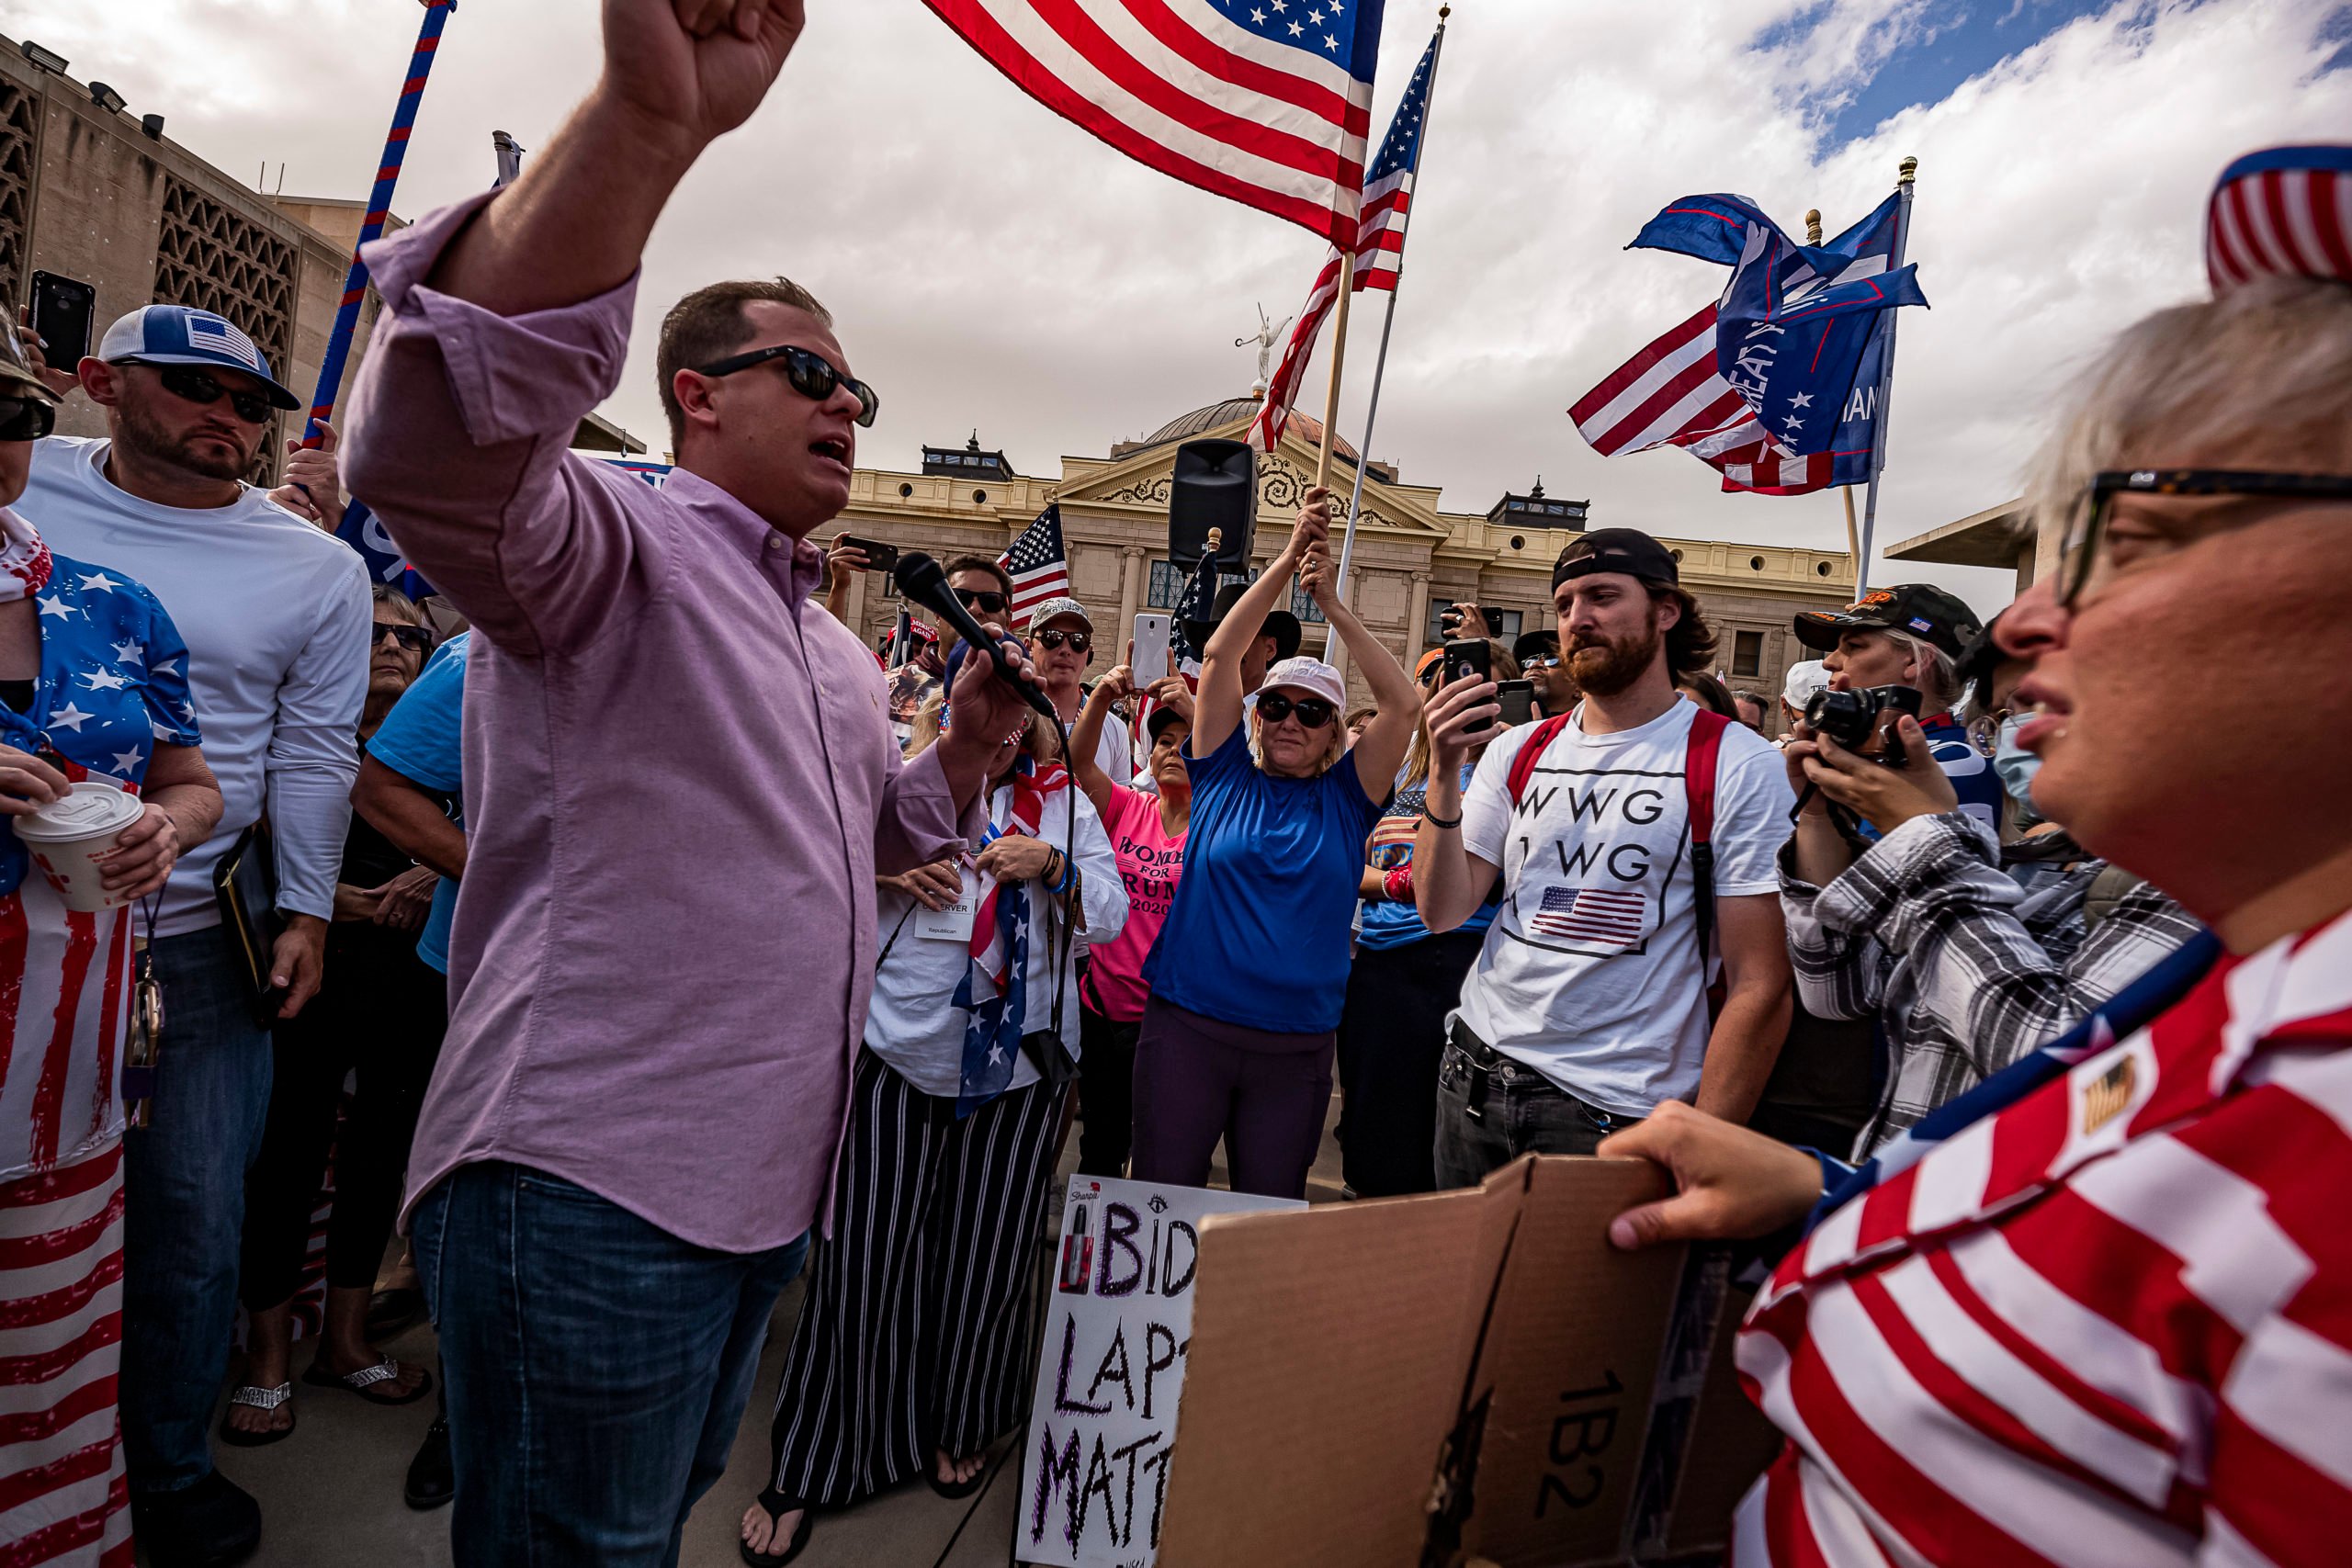 Supporters of President Donald Trump demonstrate in front of the Arizona State Capitol in Phoenix, Arizona, on Nov. 7. (Olivier Touron/AFP via Getty Images)